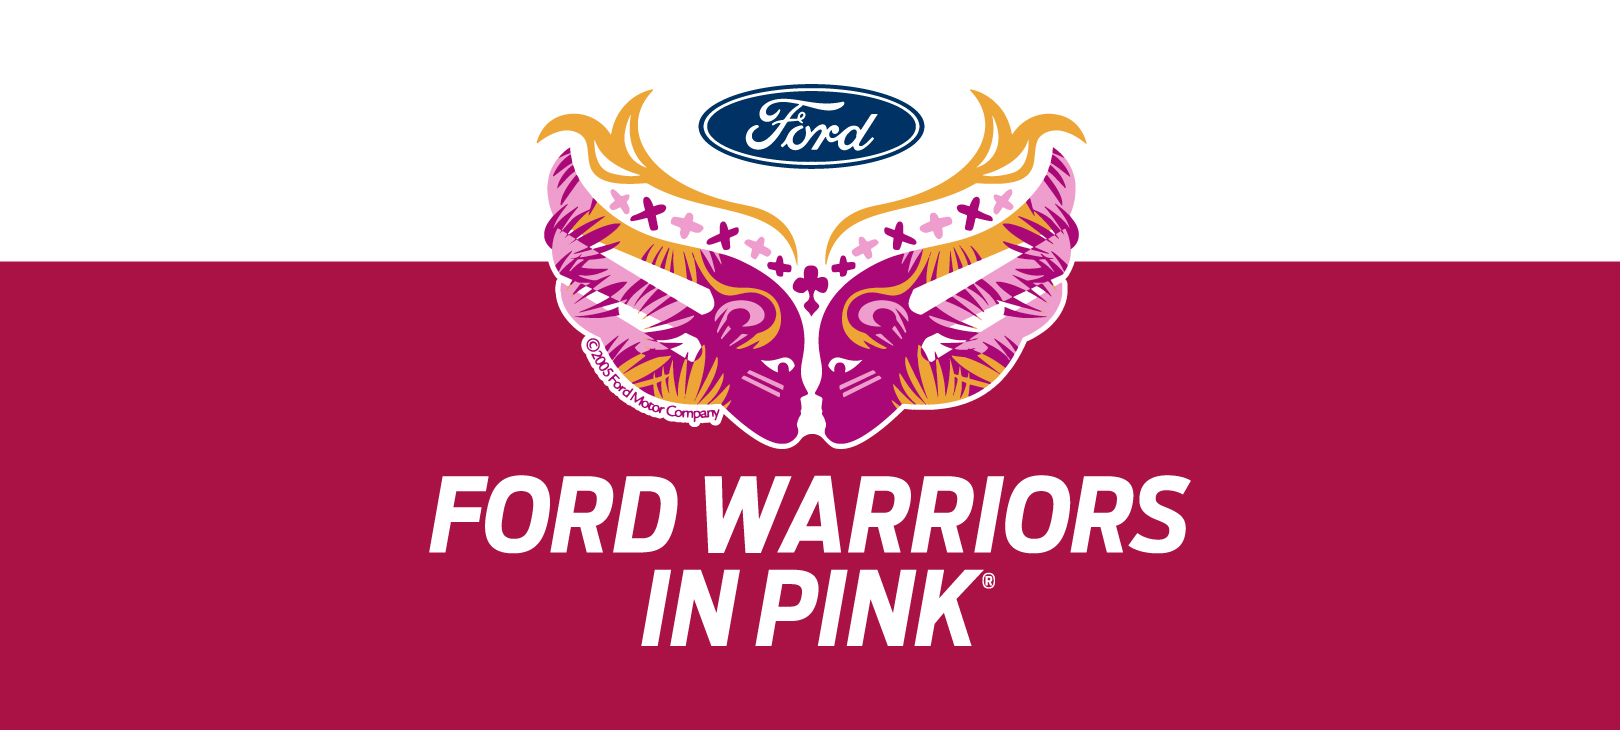 How Ford Gives Back with Warriors in Pink®